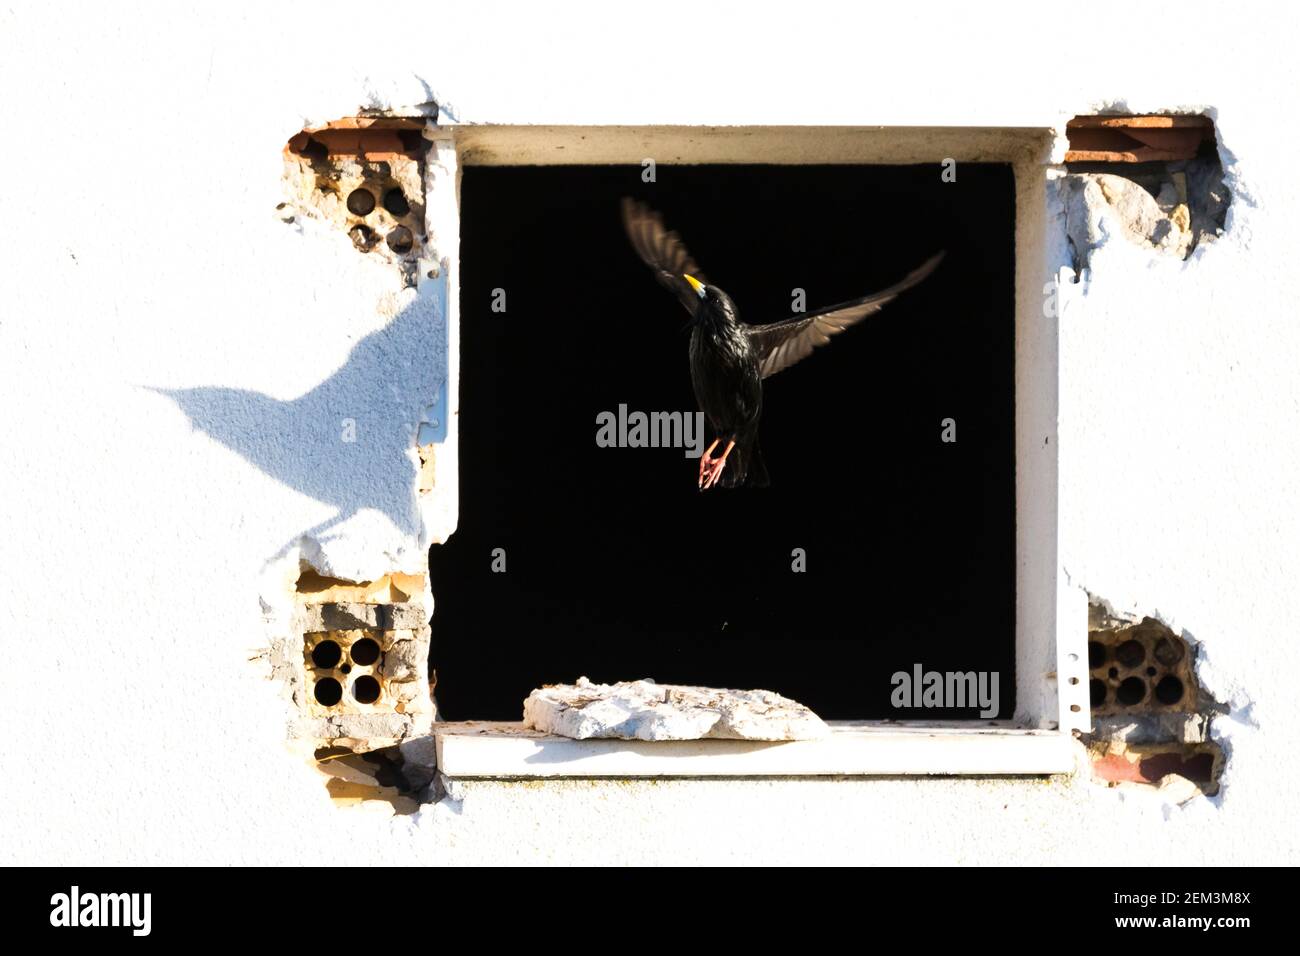 spotless starling (Sturnus unicolor), flying out of a window, Spain Stock Photo